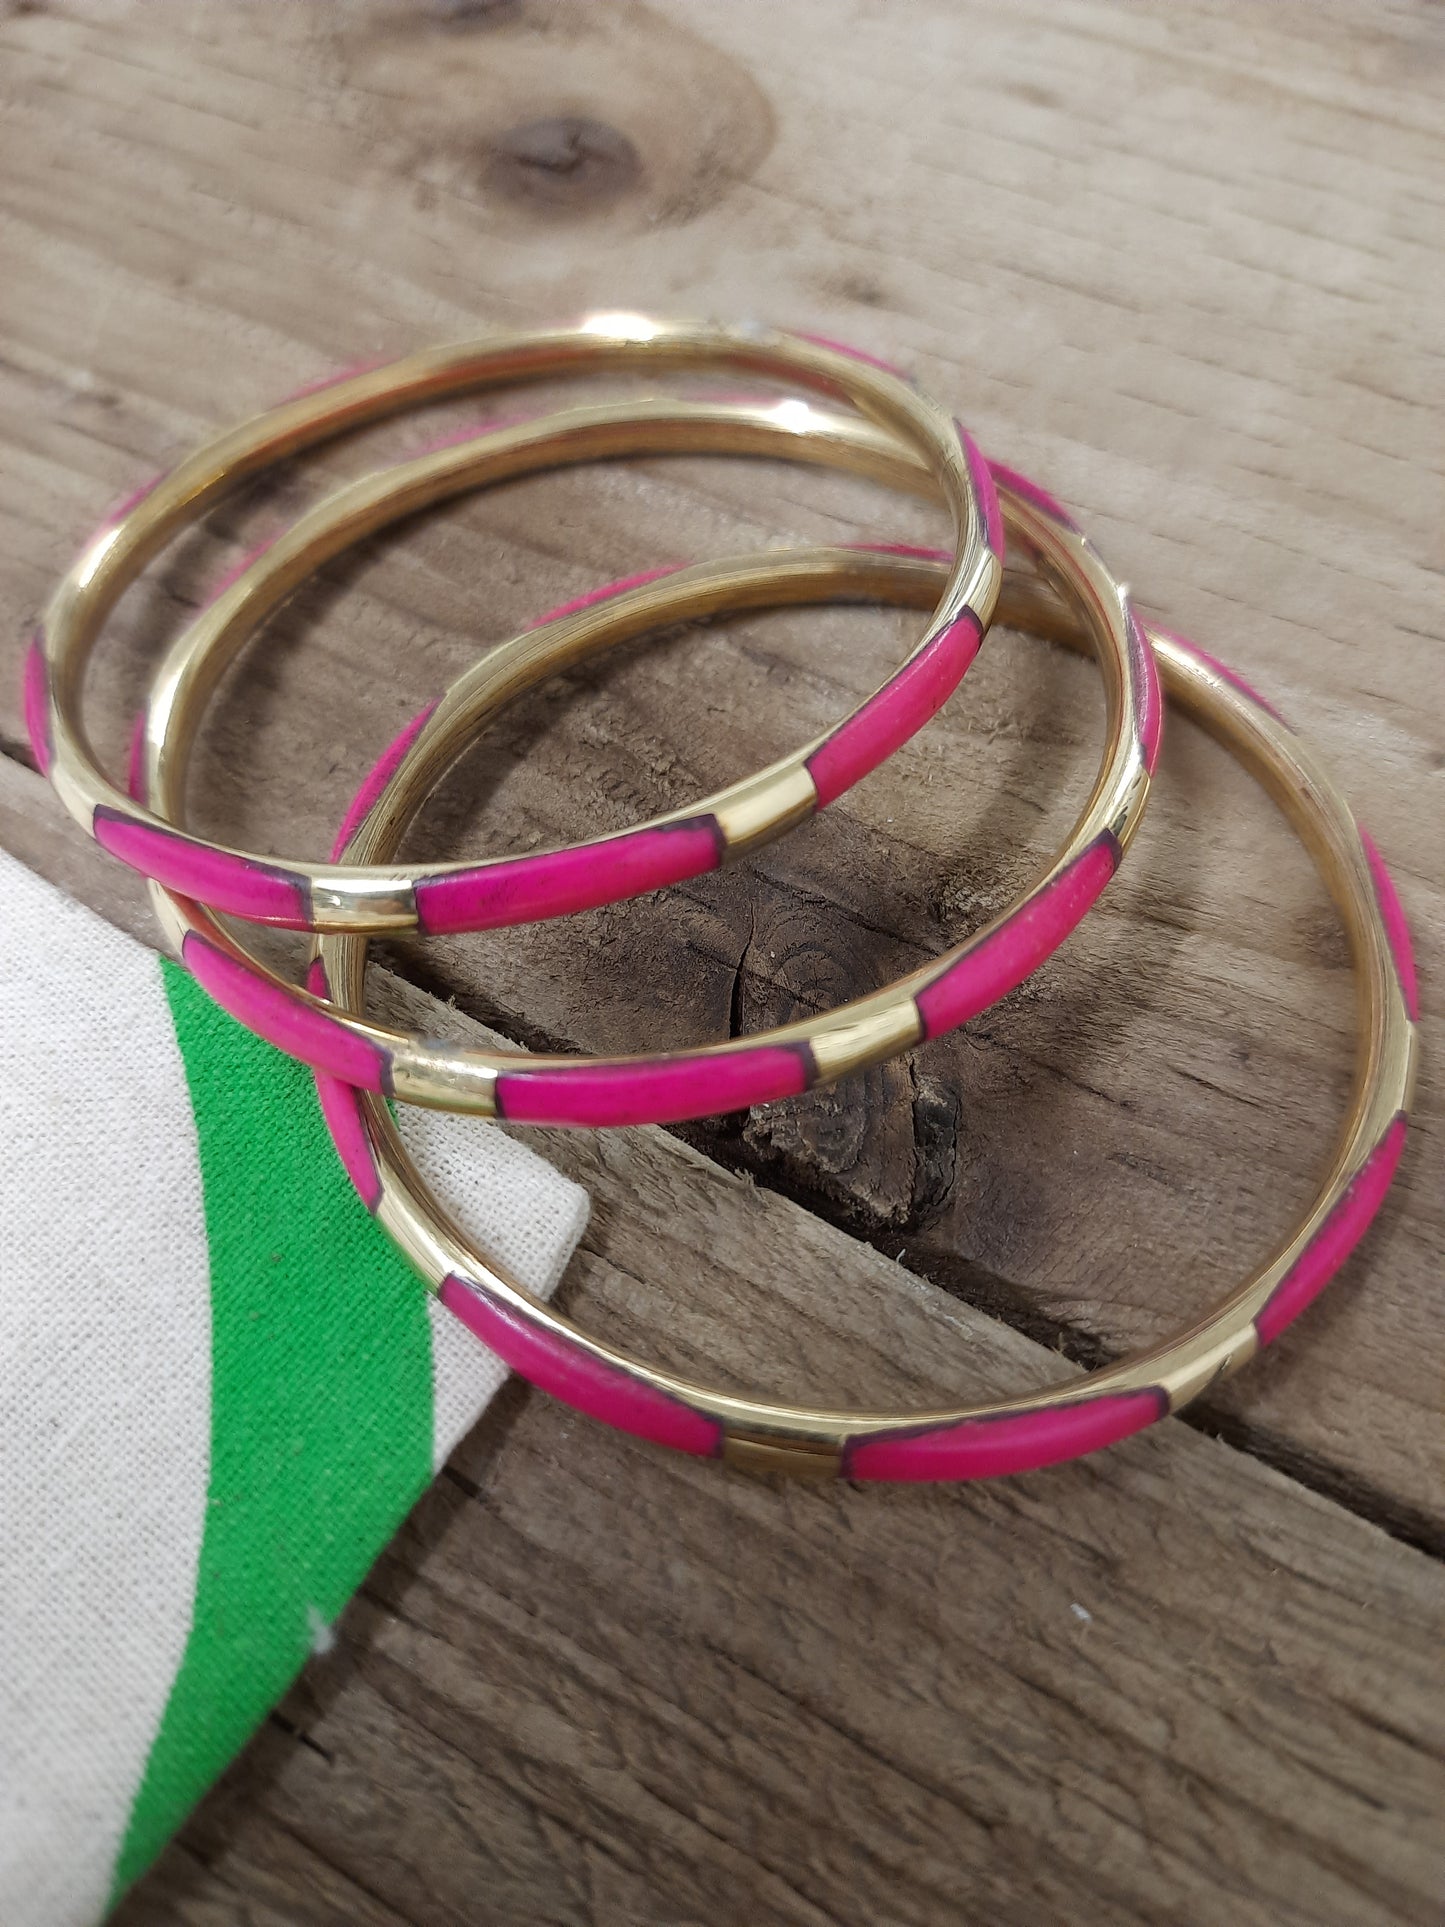 Fair Trade Jewelry | Spectacular Bangles | 3 Set | Ethical Gifts | Striking Quality